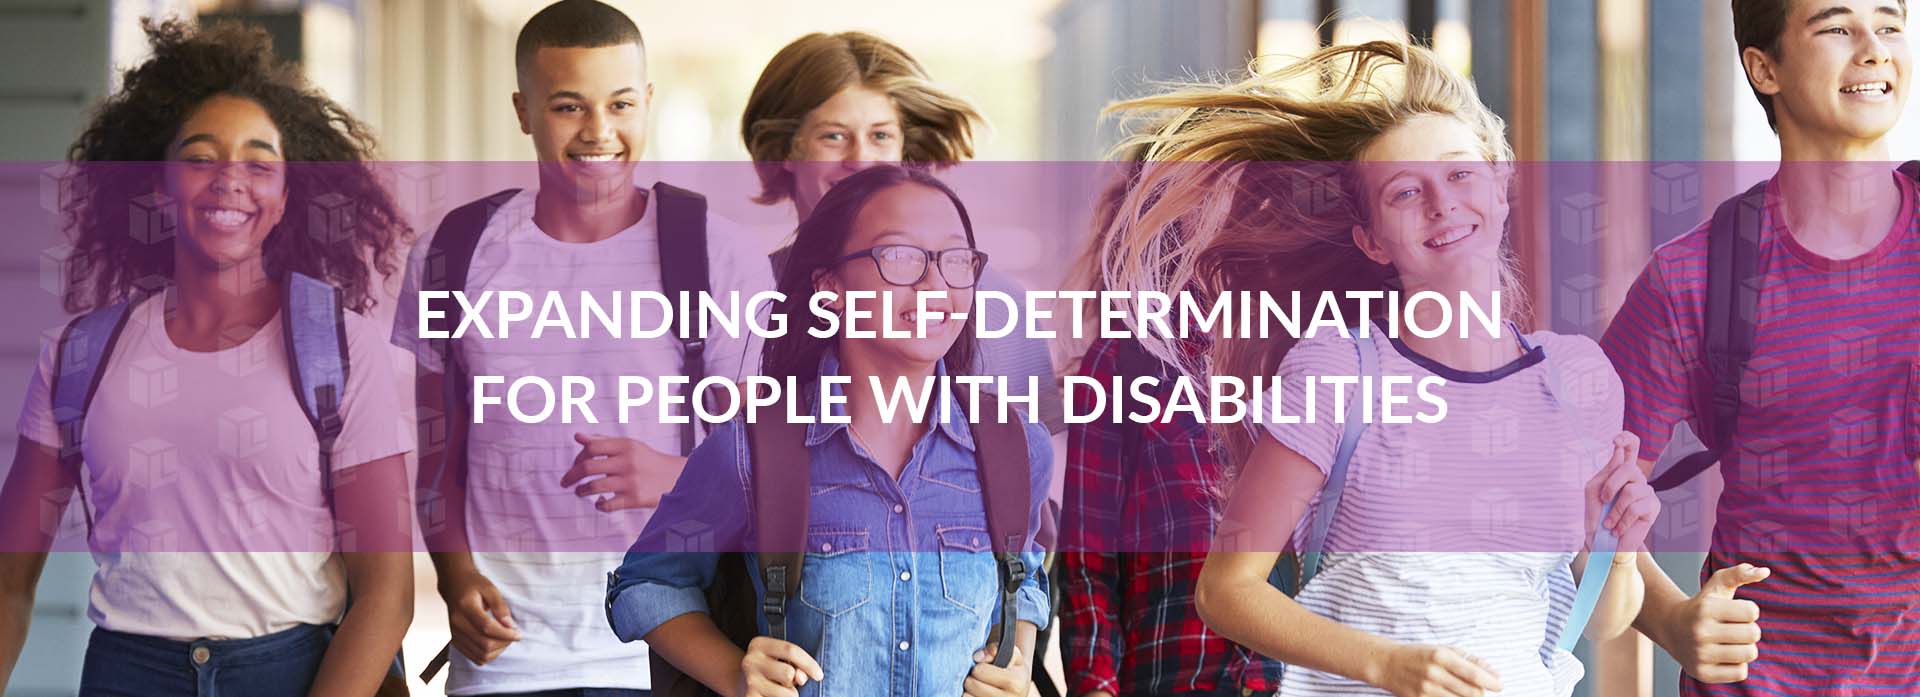 Expanding Self-Determination For People With Disabilities